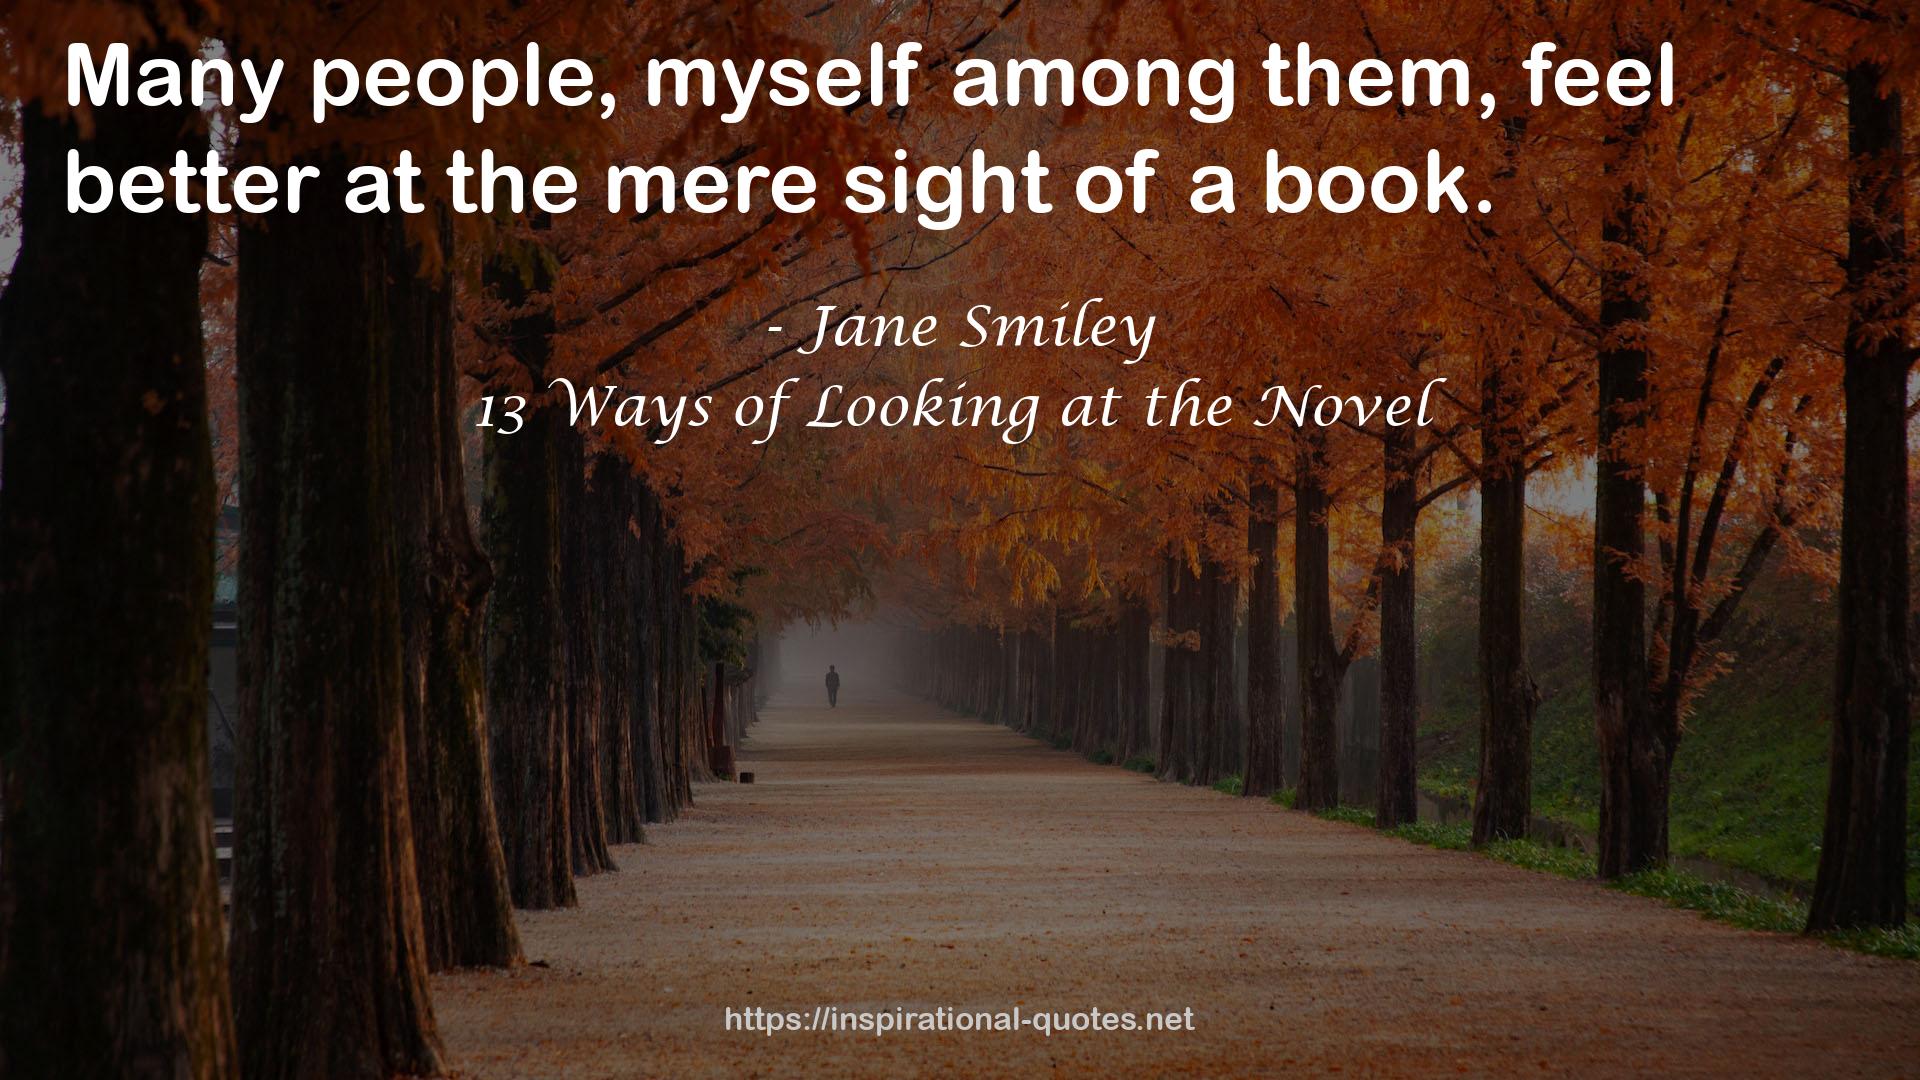 13 Ways of Looking at the Novel QUOTES